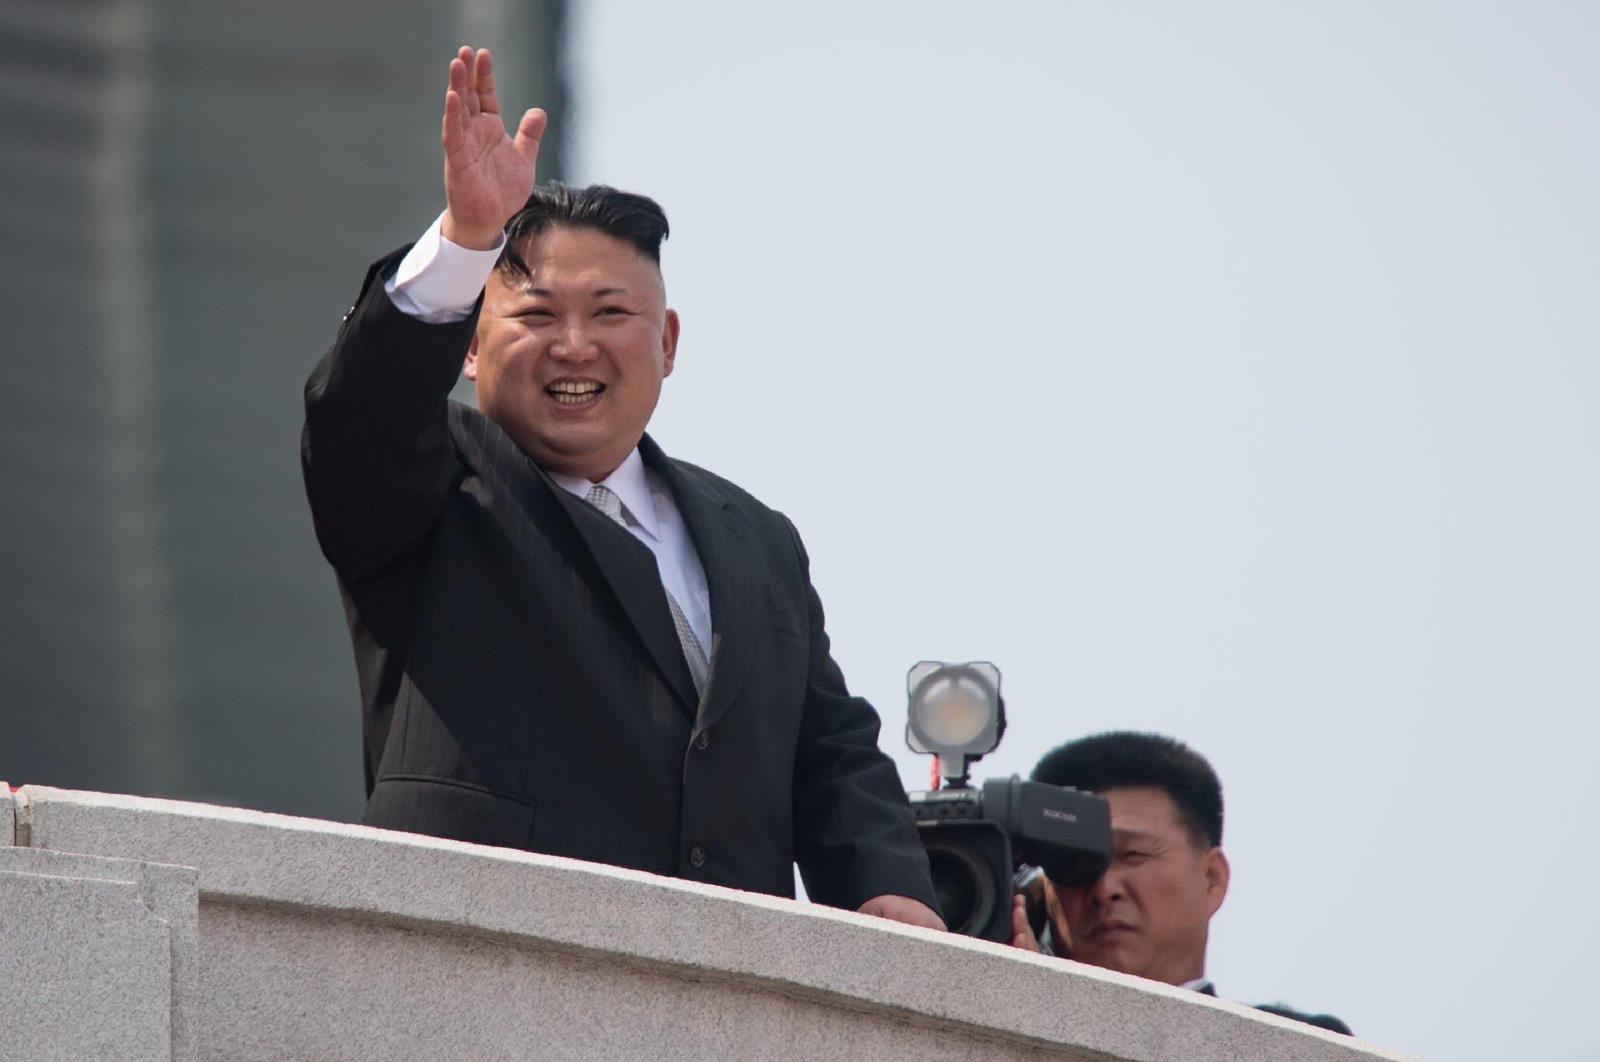 This file photo taken on April 15, 2017 shows North Korean leader Kim Jong Un waving from a balcony of the Grand People's Study House following a military parade marking the 105th anniversary of the birth of late North Korean leader Kim Il-Sung in Pyongyang. (AFP Photo)